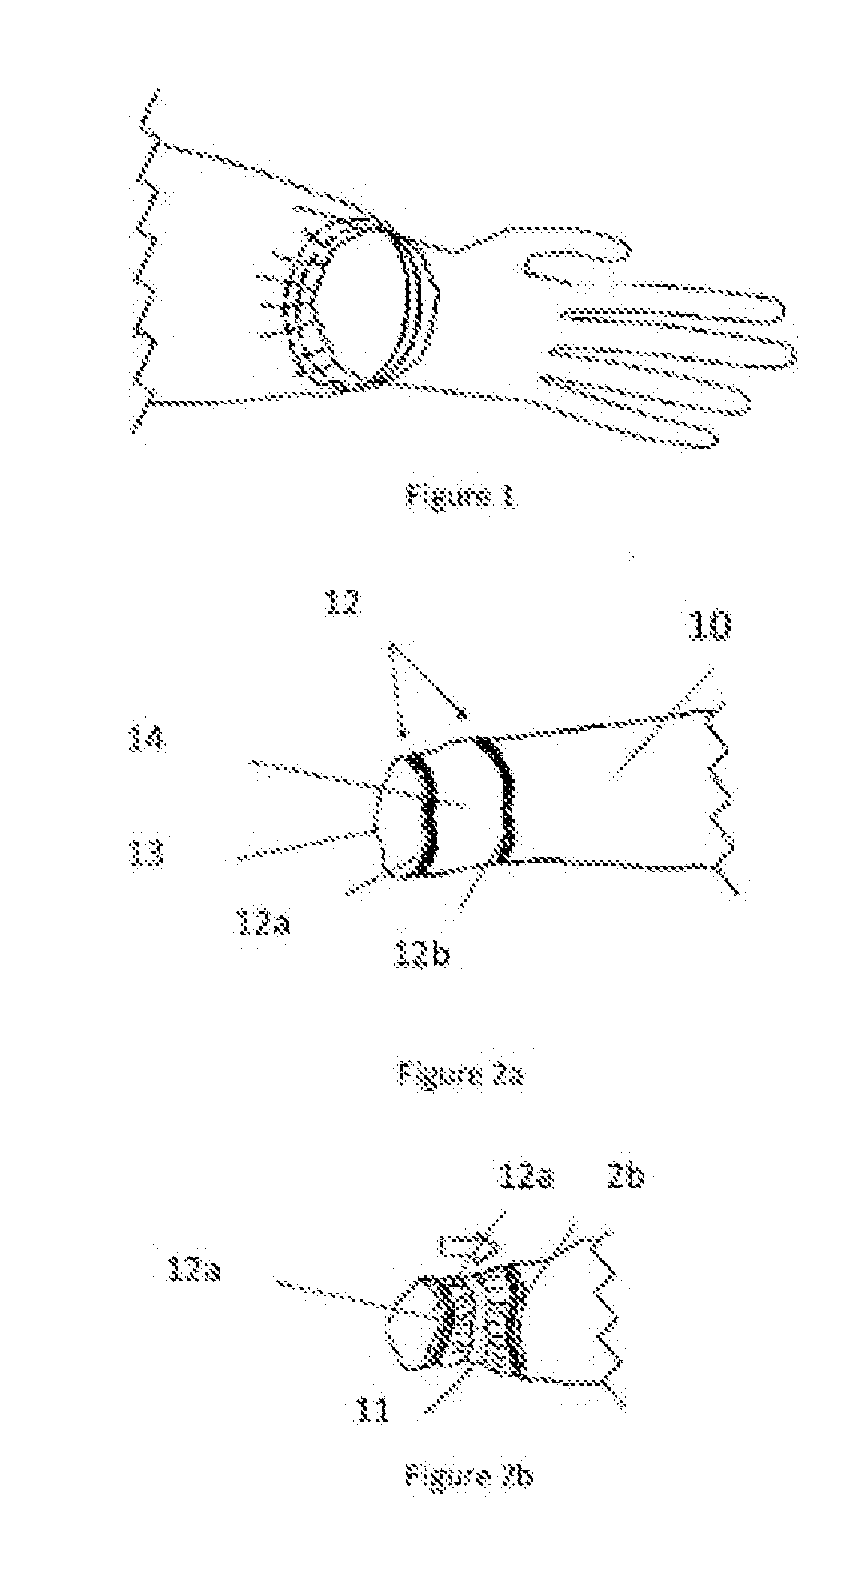 Electrostatic dissipative garment with interchangeable elastic bands